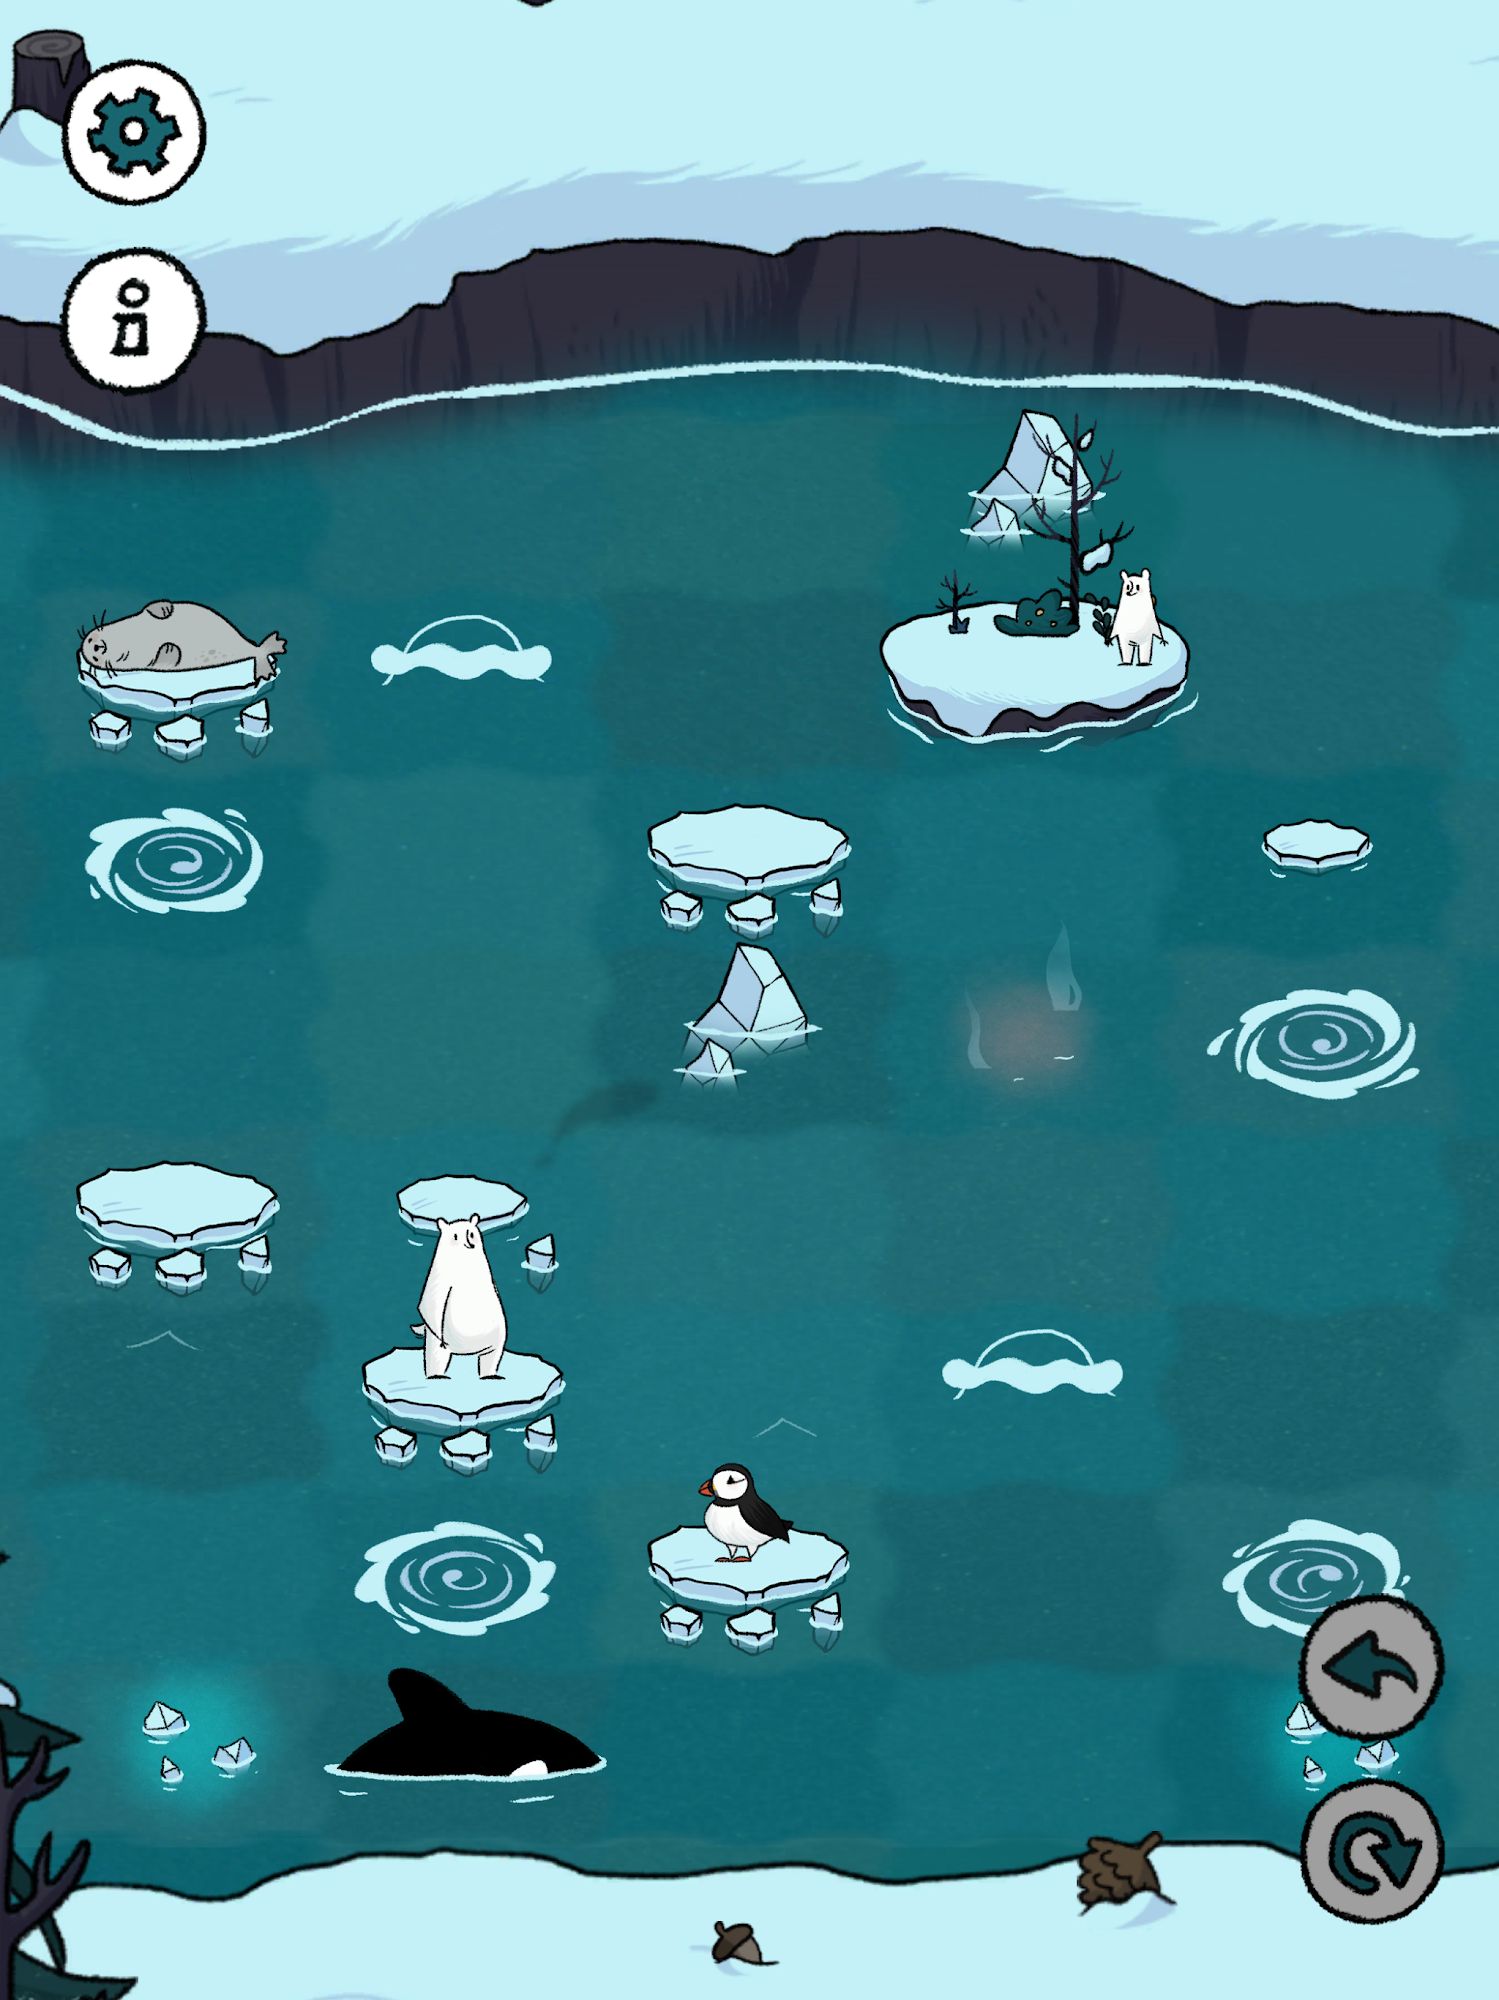 Arctictopia for Android